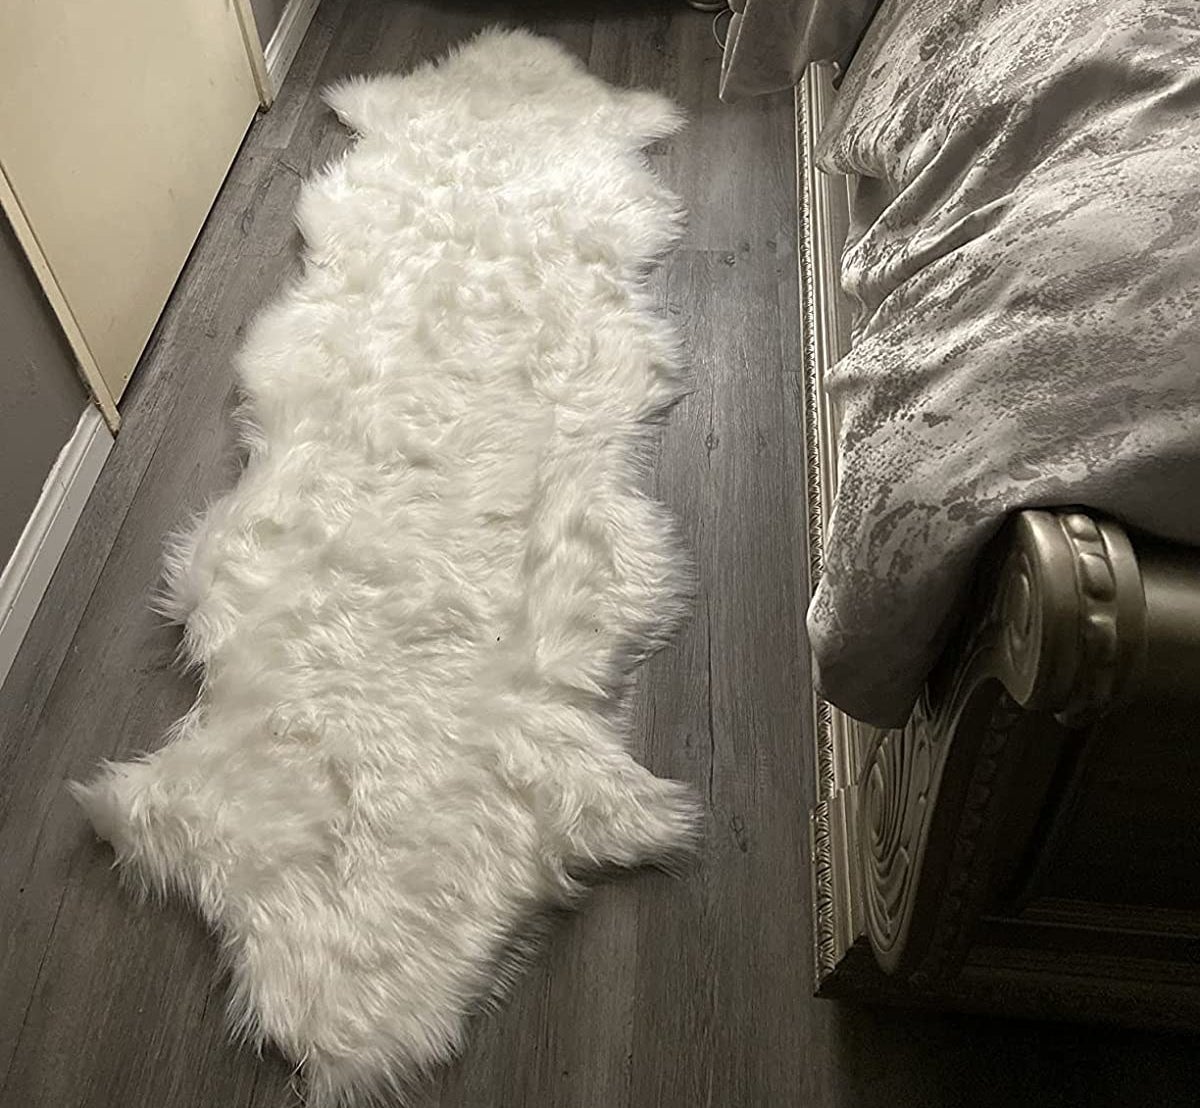 Reviewer image of faux fur rug next to the bed